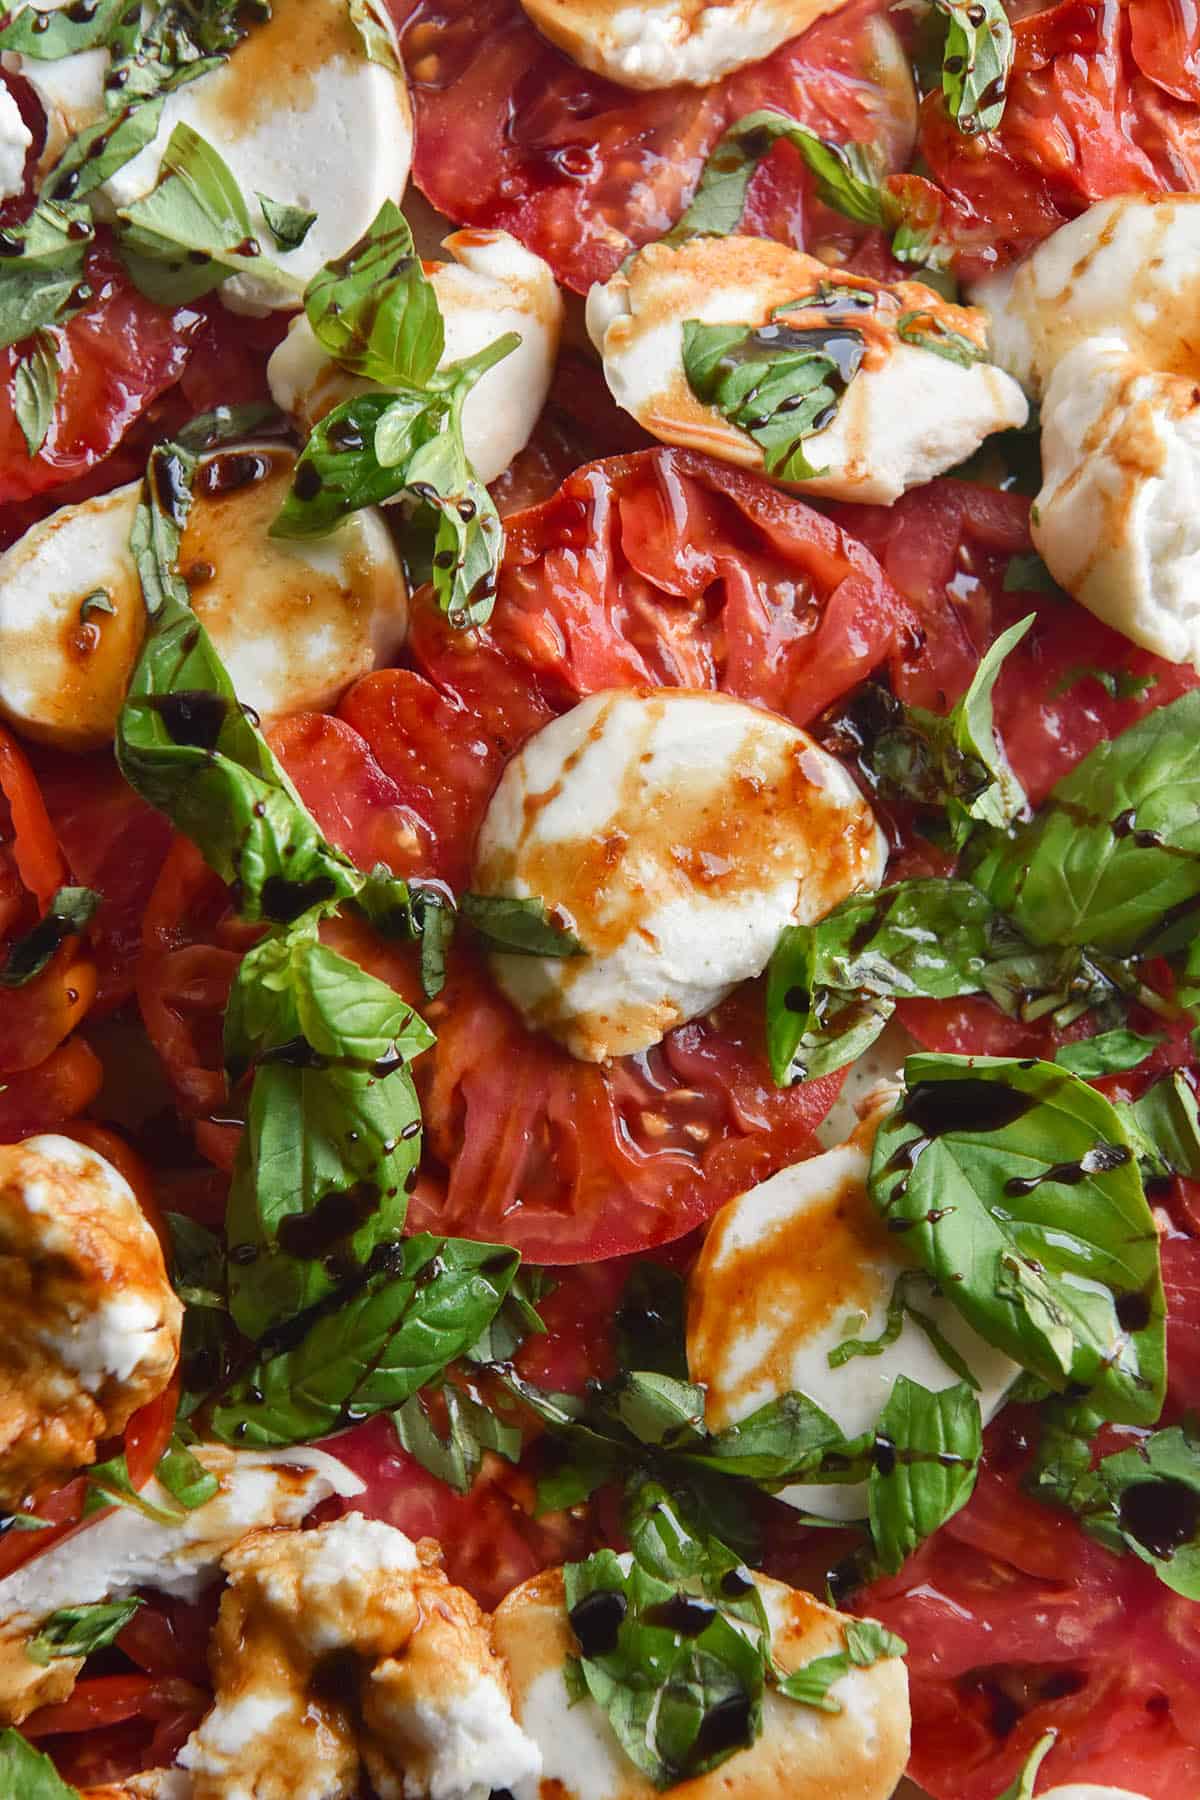 An aerial close up view of slices of vegan mozzarella in a caprese salad. The salad is drizzled with a balsamic reduction which colours parts of the mozzarella in a deep orange hue